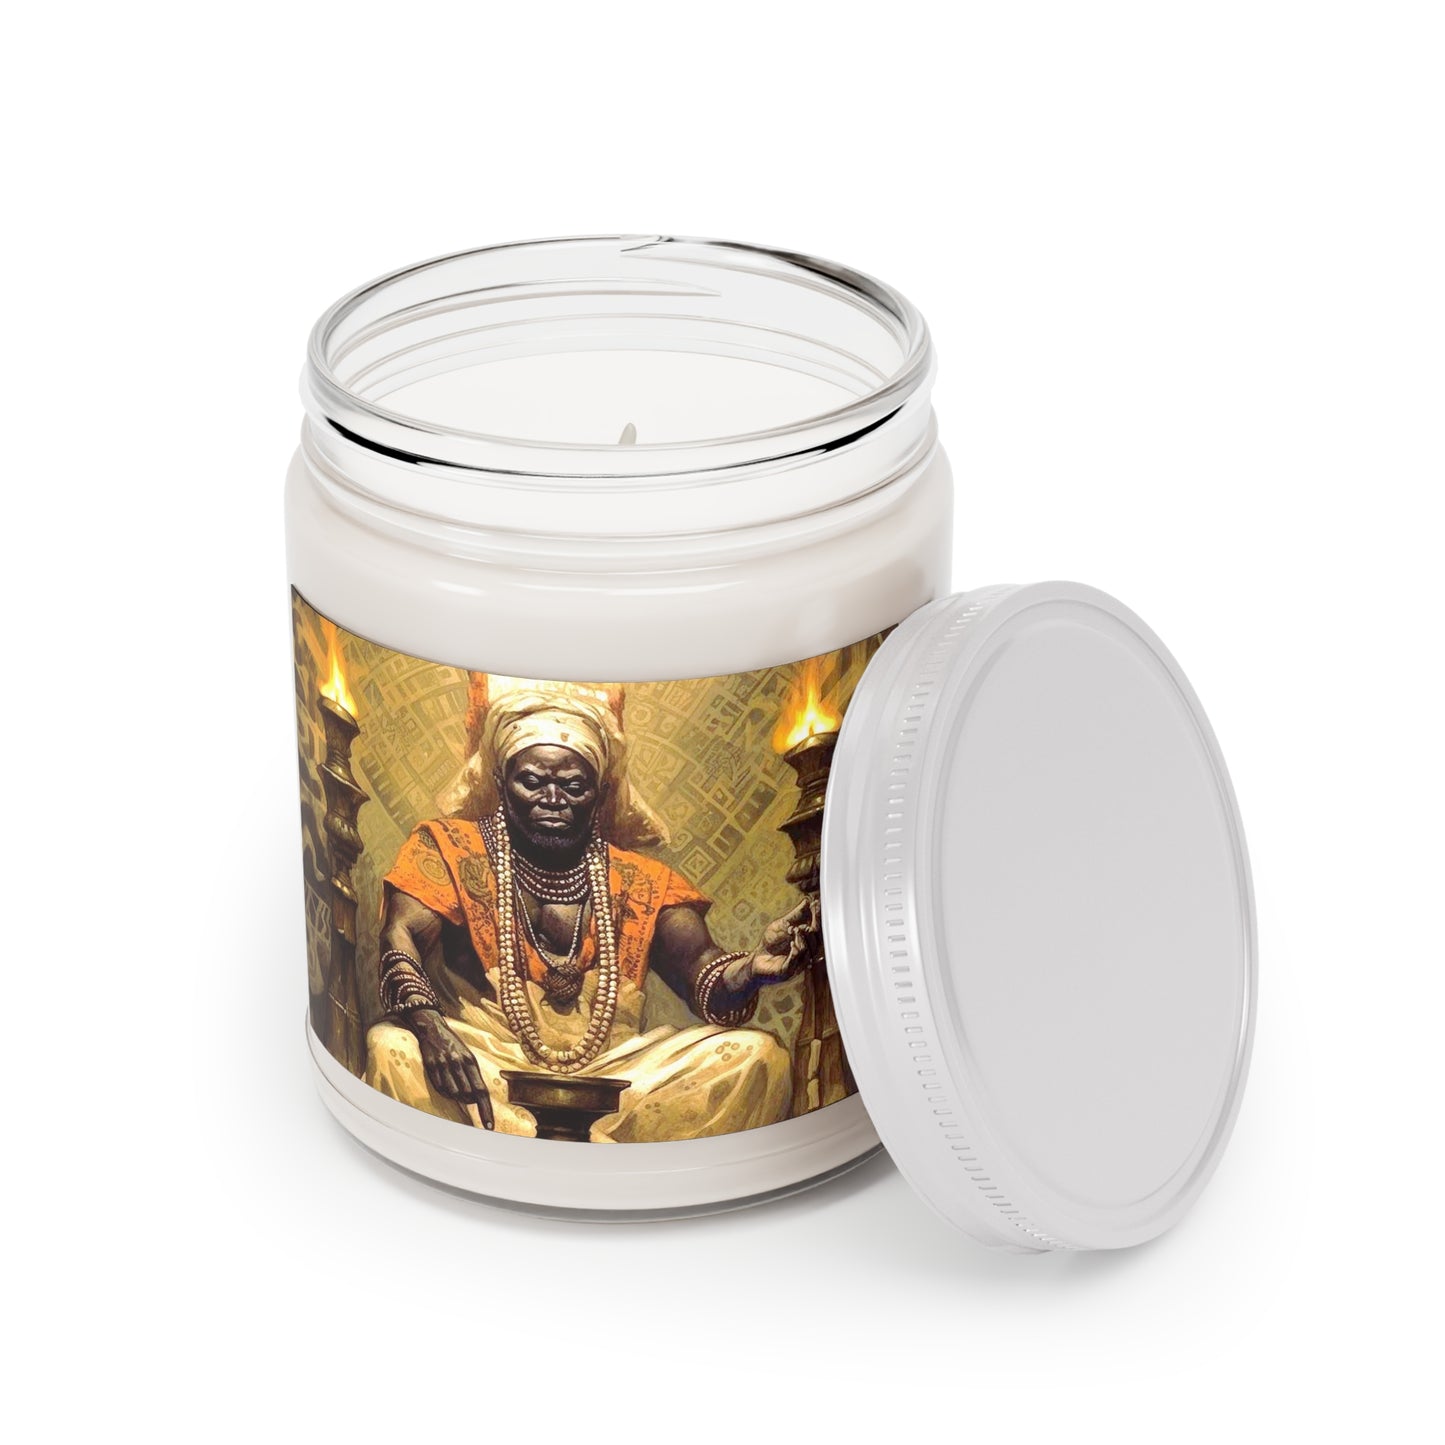 Orunmila Scented Candles, 9oz